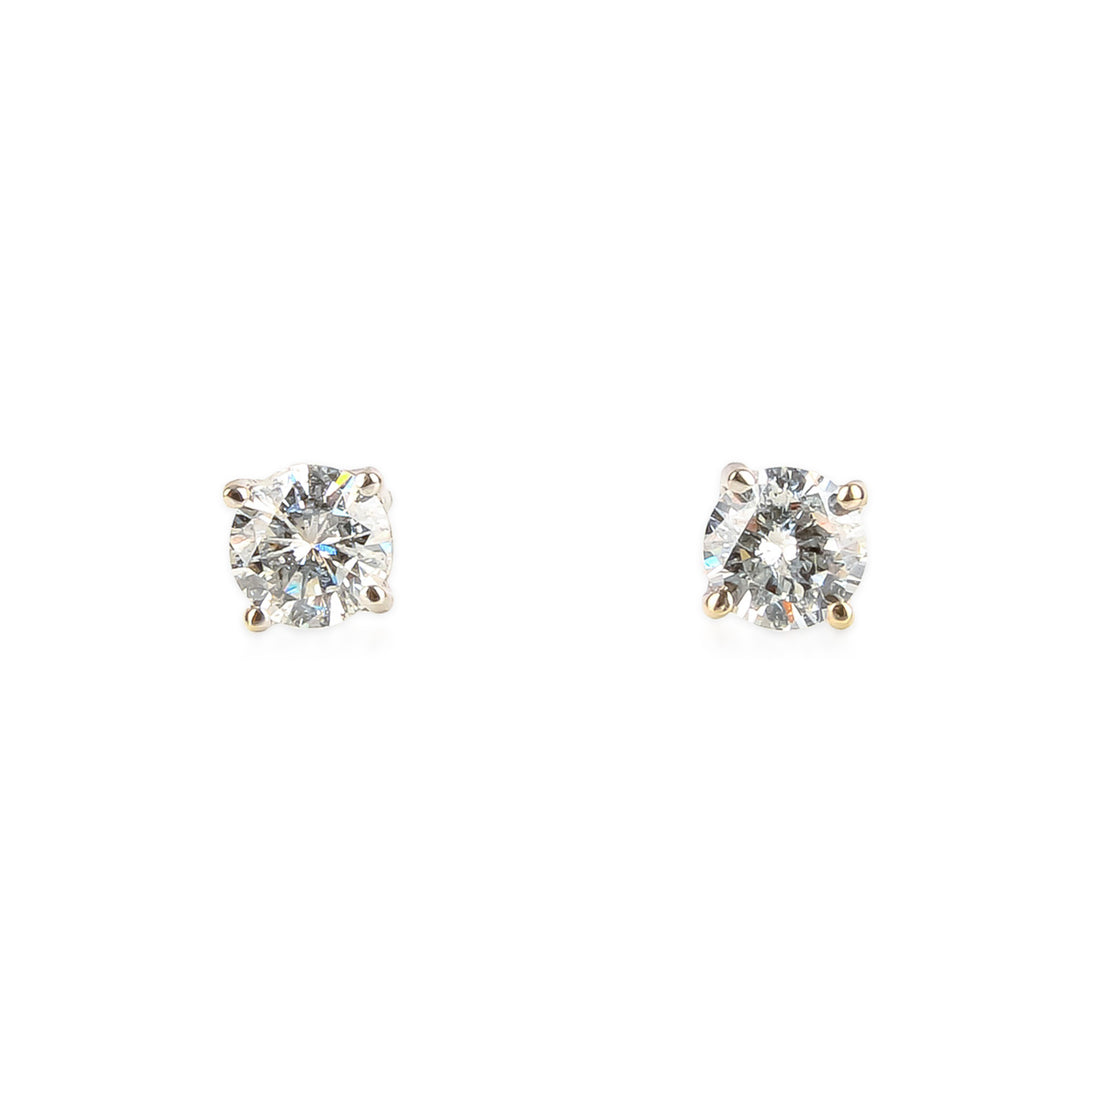 18K White Gold Diamond Stud Earrings with Jackets